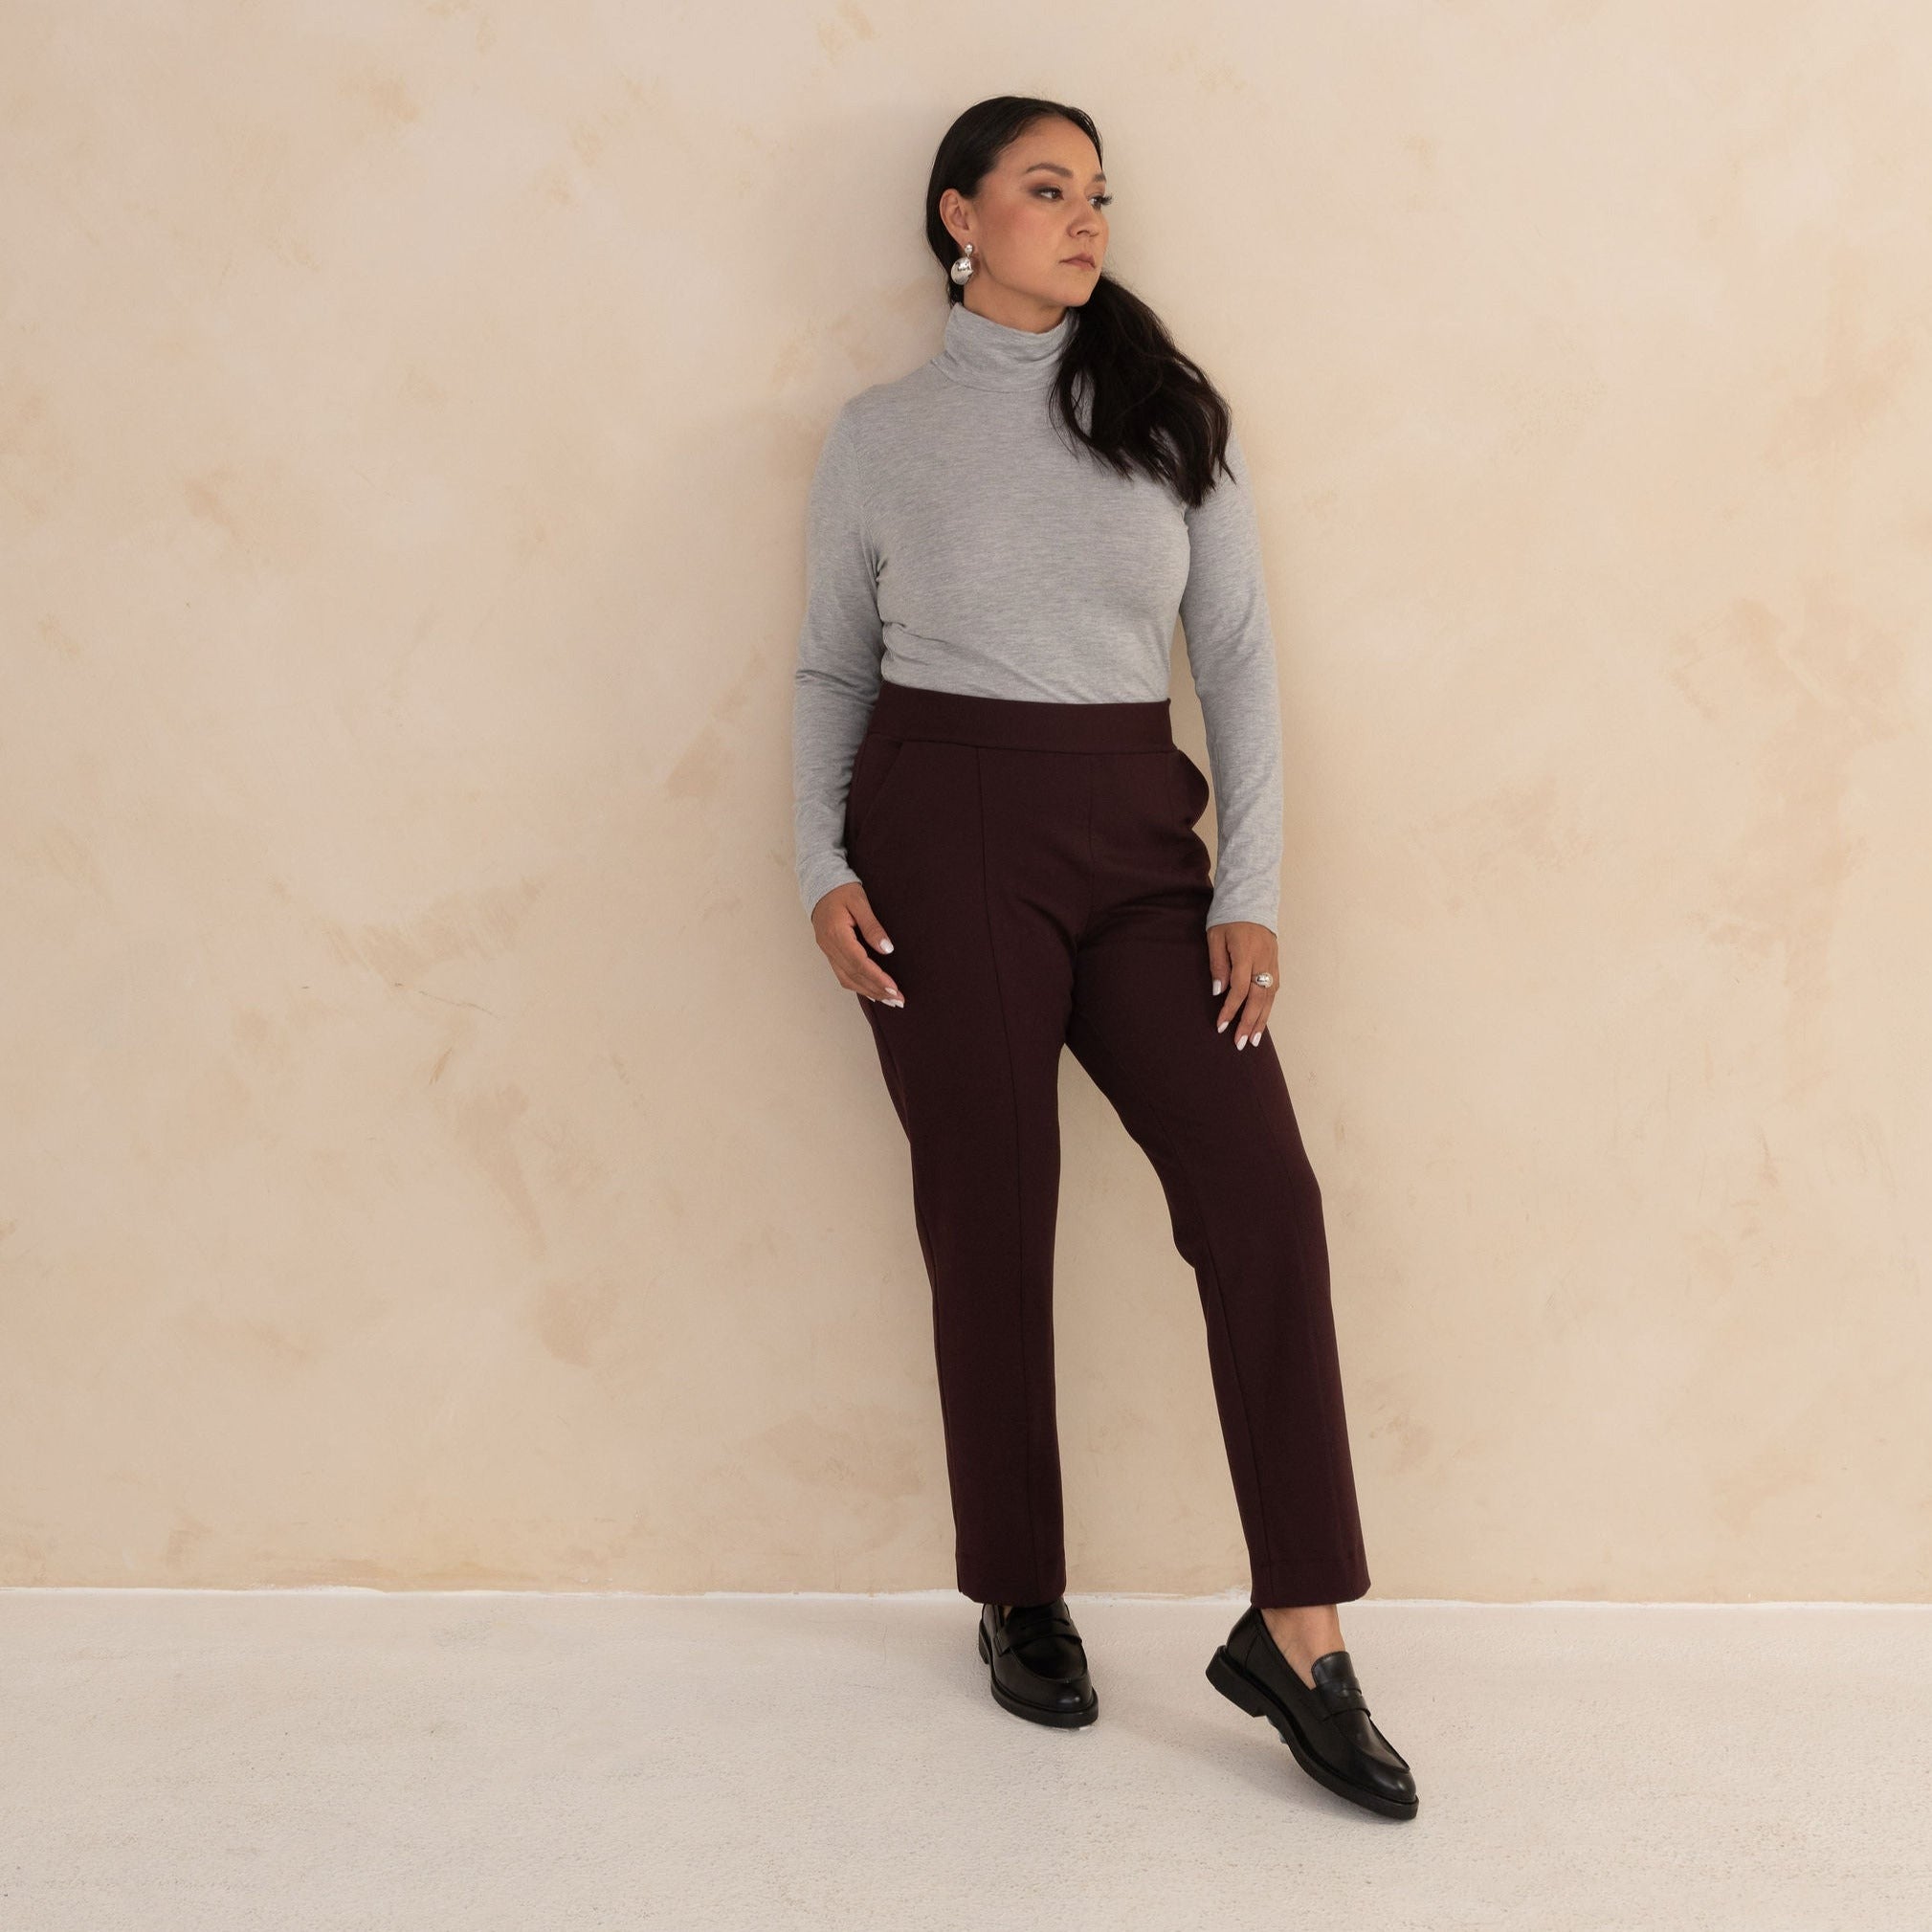 woman wearing a light grey longsleeve turtleneck and tailored navy pants with black loafers